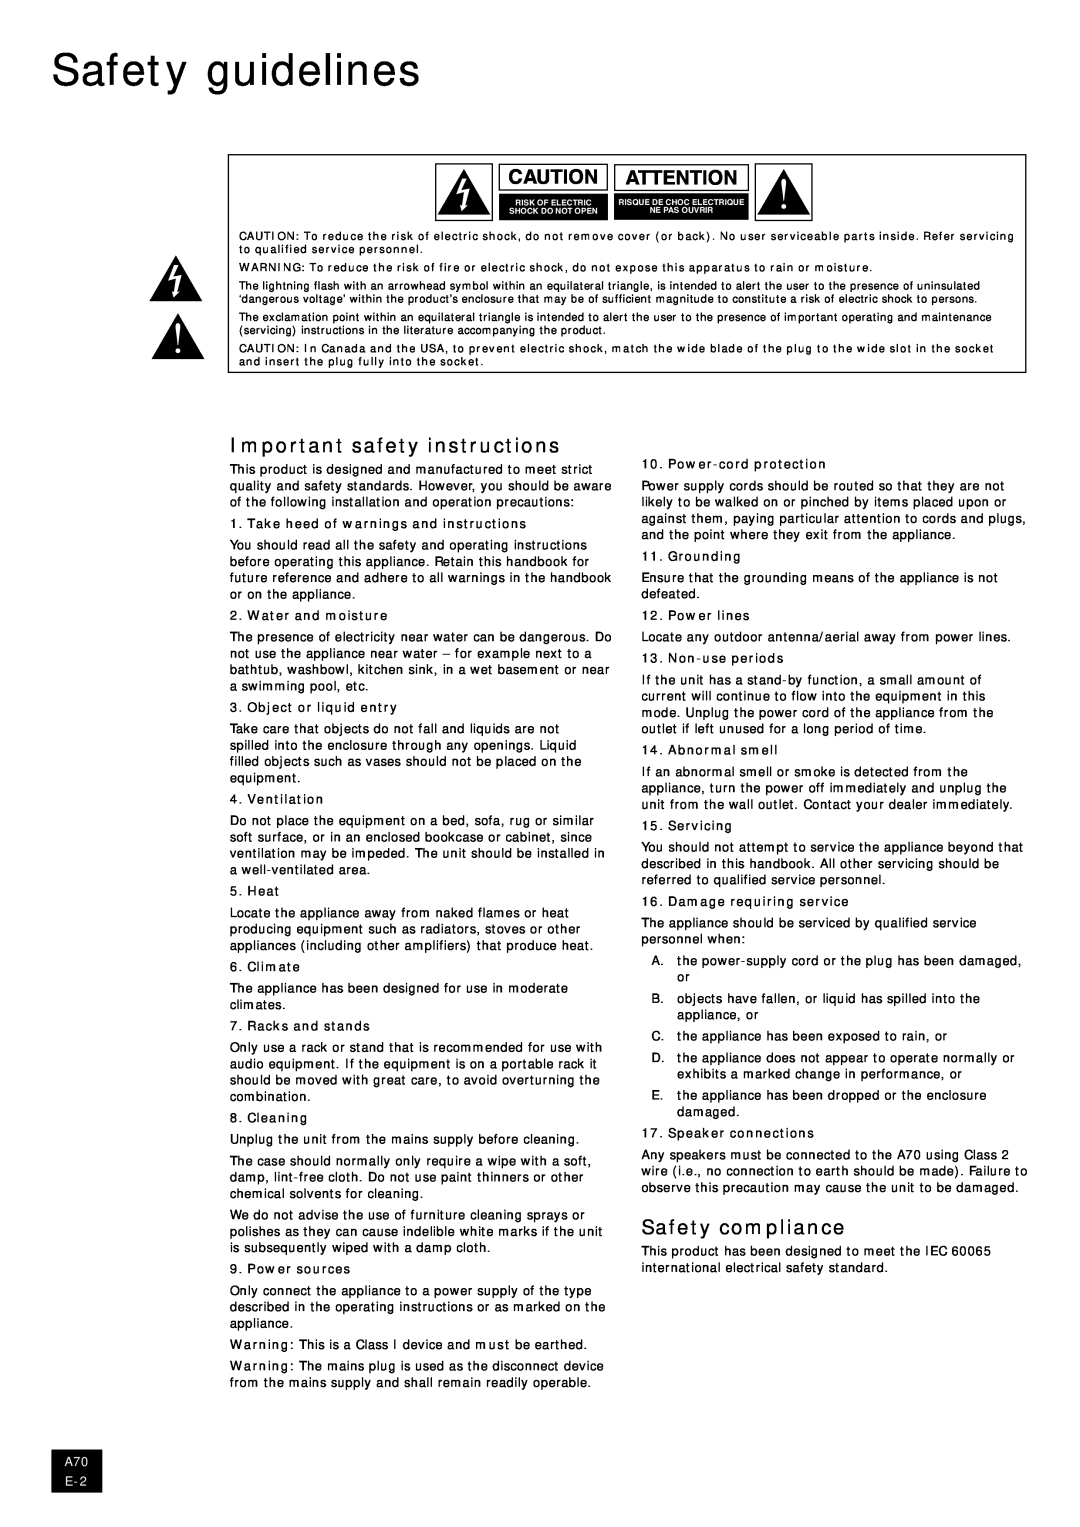 Arcam A70 Safety guidelines, Important safety instructions, Safety compliance, Take heed of warnings and instructions 